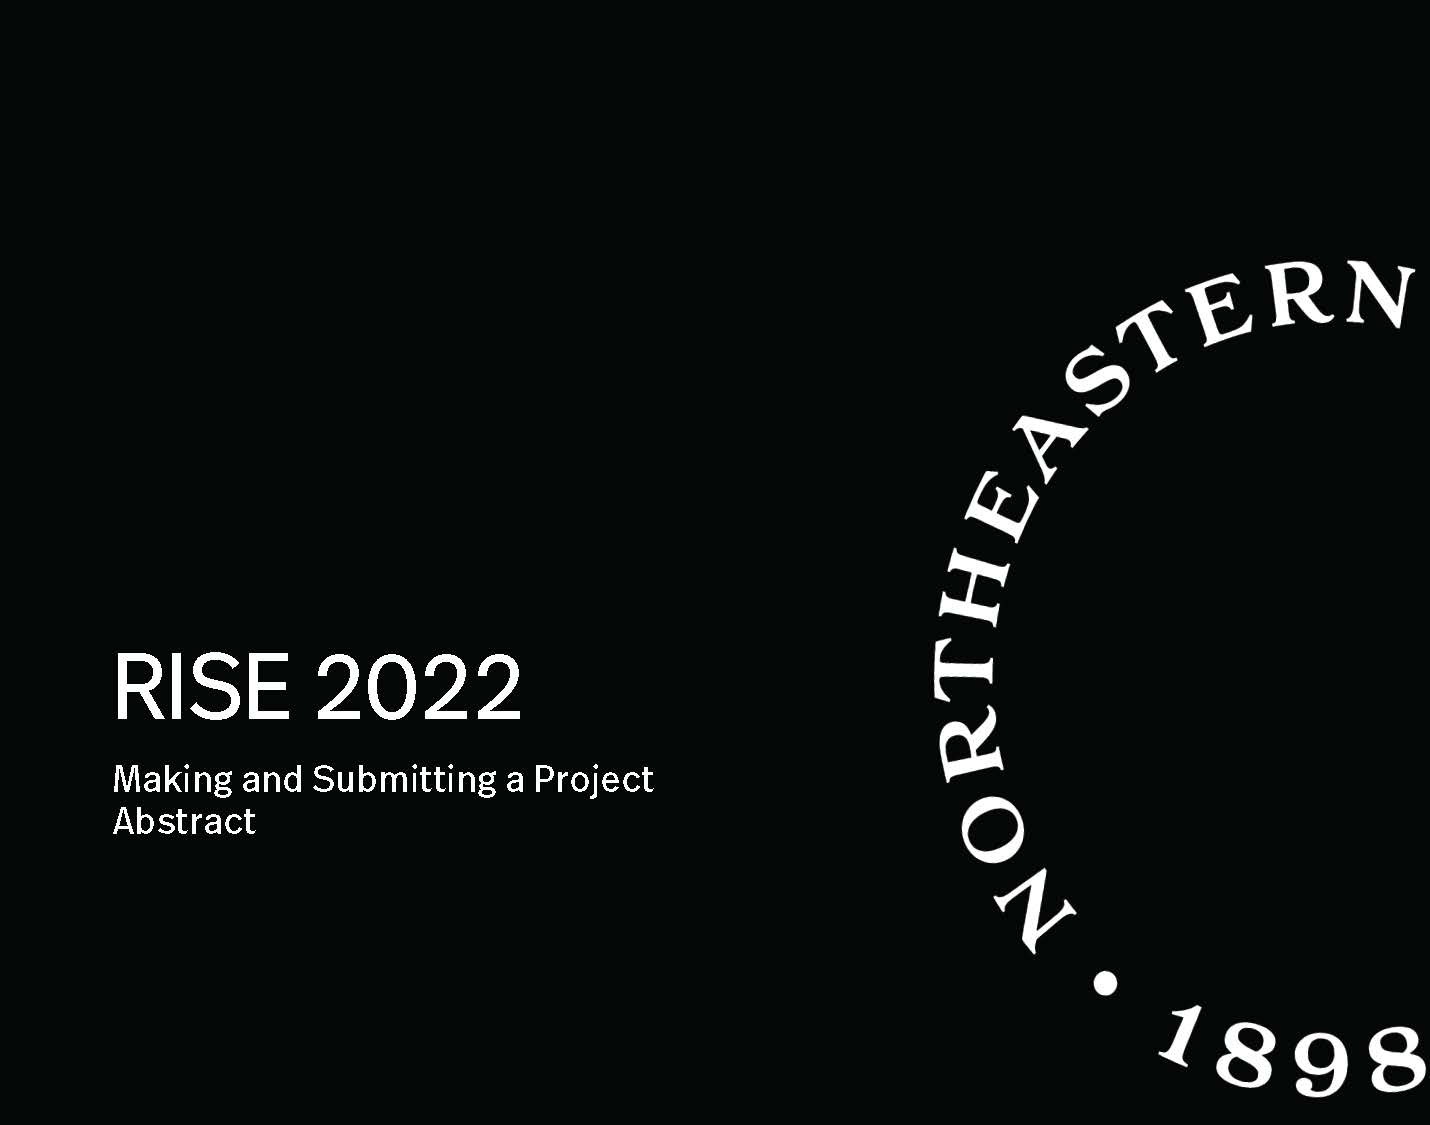 RISE 2022 Submit Your Abstract, Save the Date Undergraduate Research